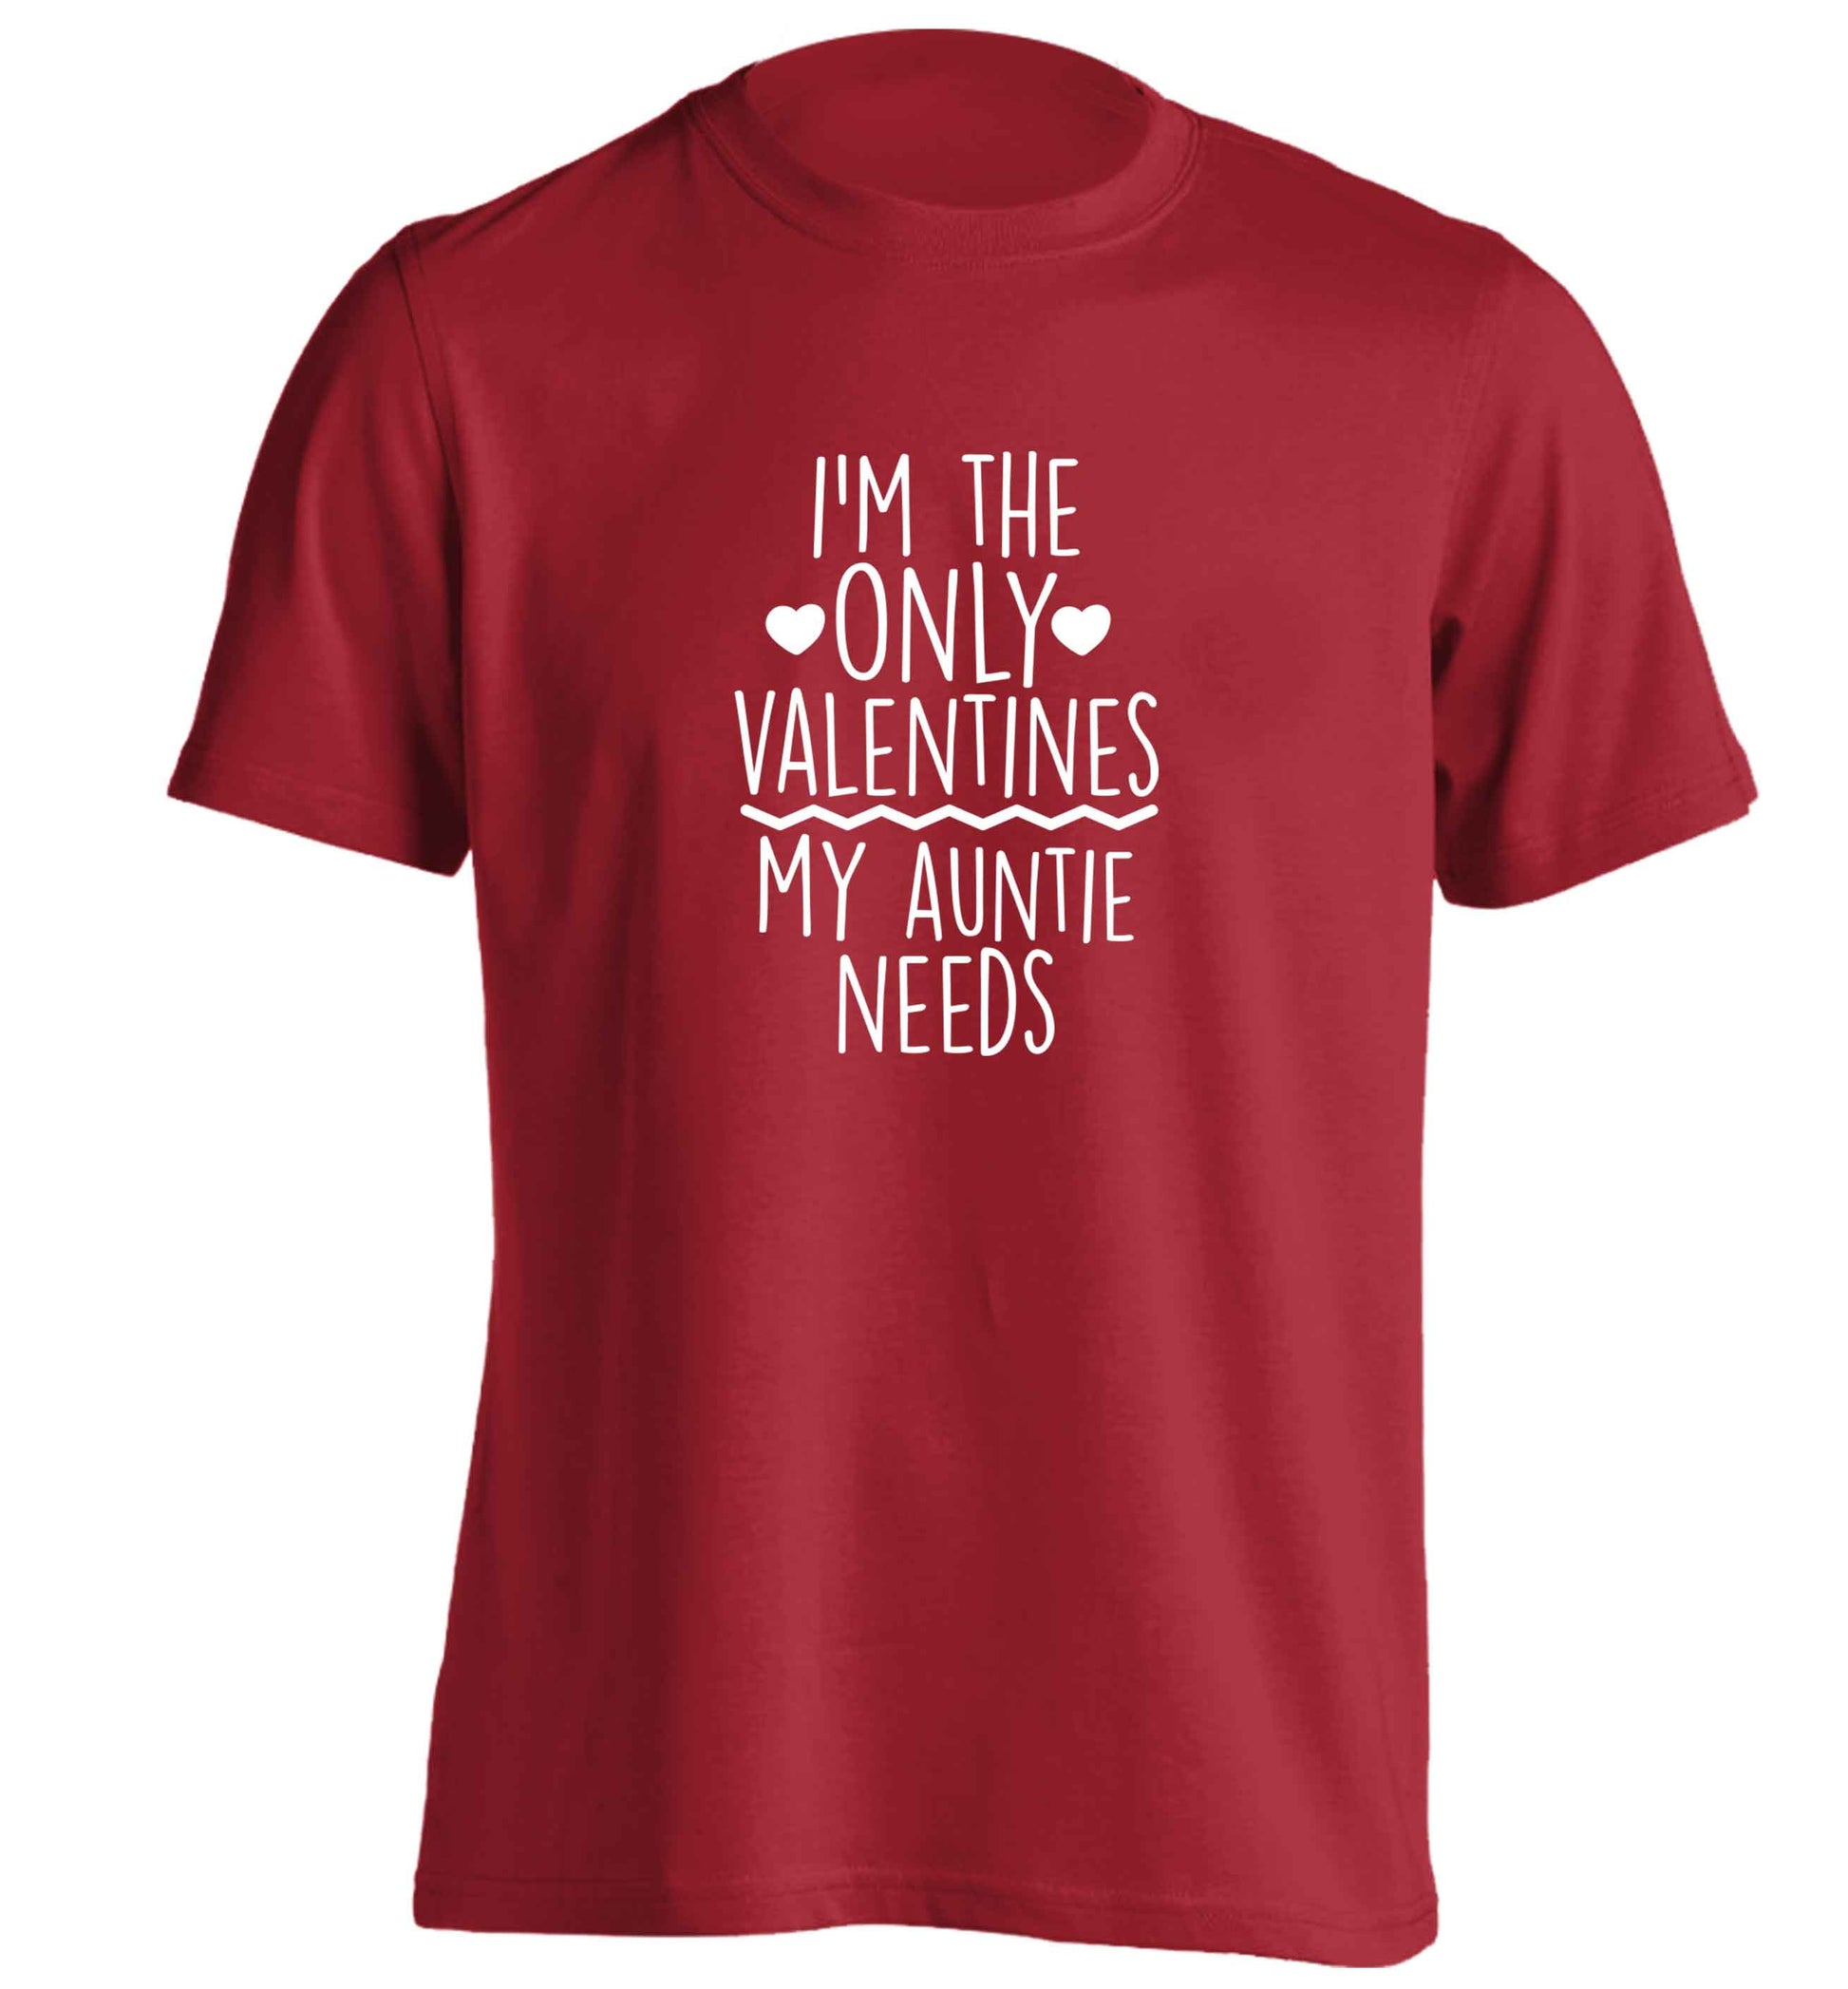 I'm the only valentines my auntie needs adults unisex red Tshirt 2XL